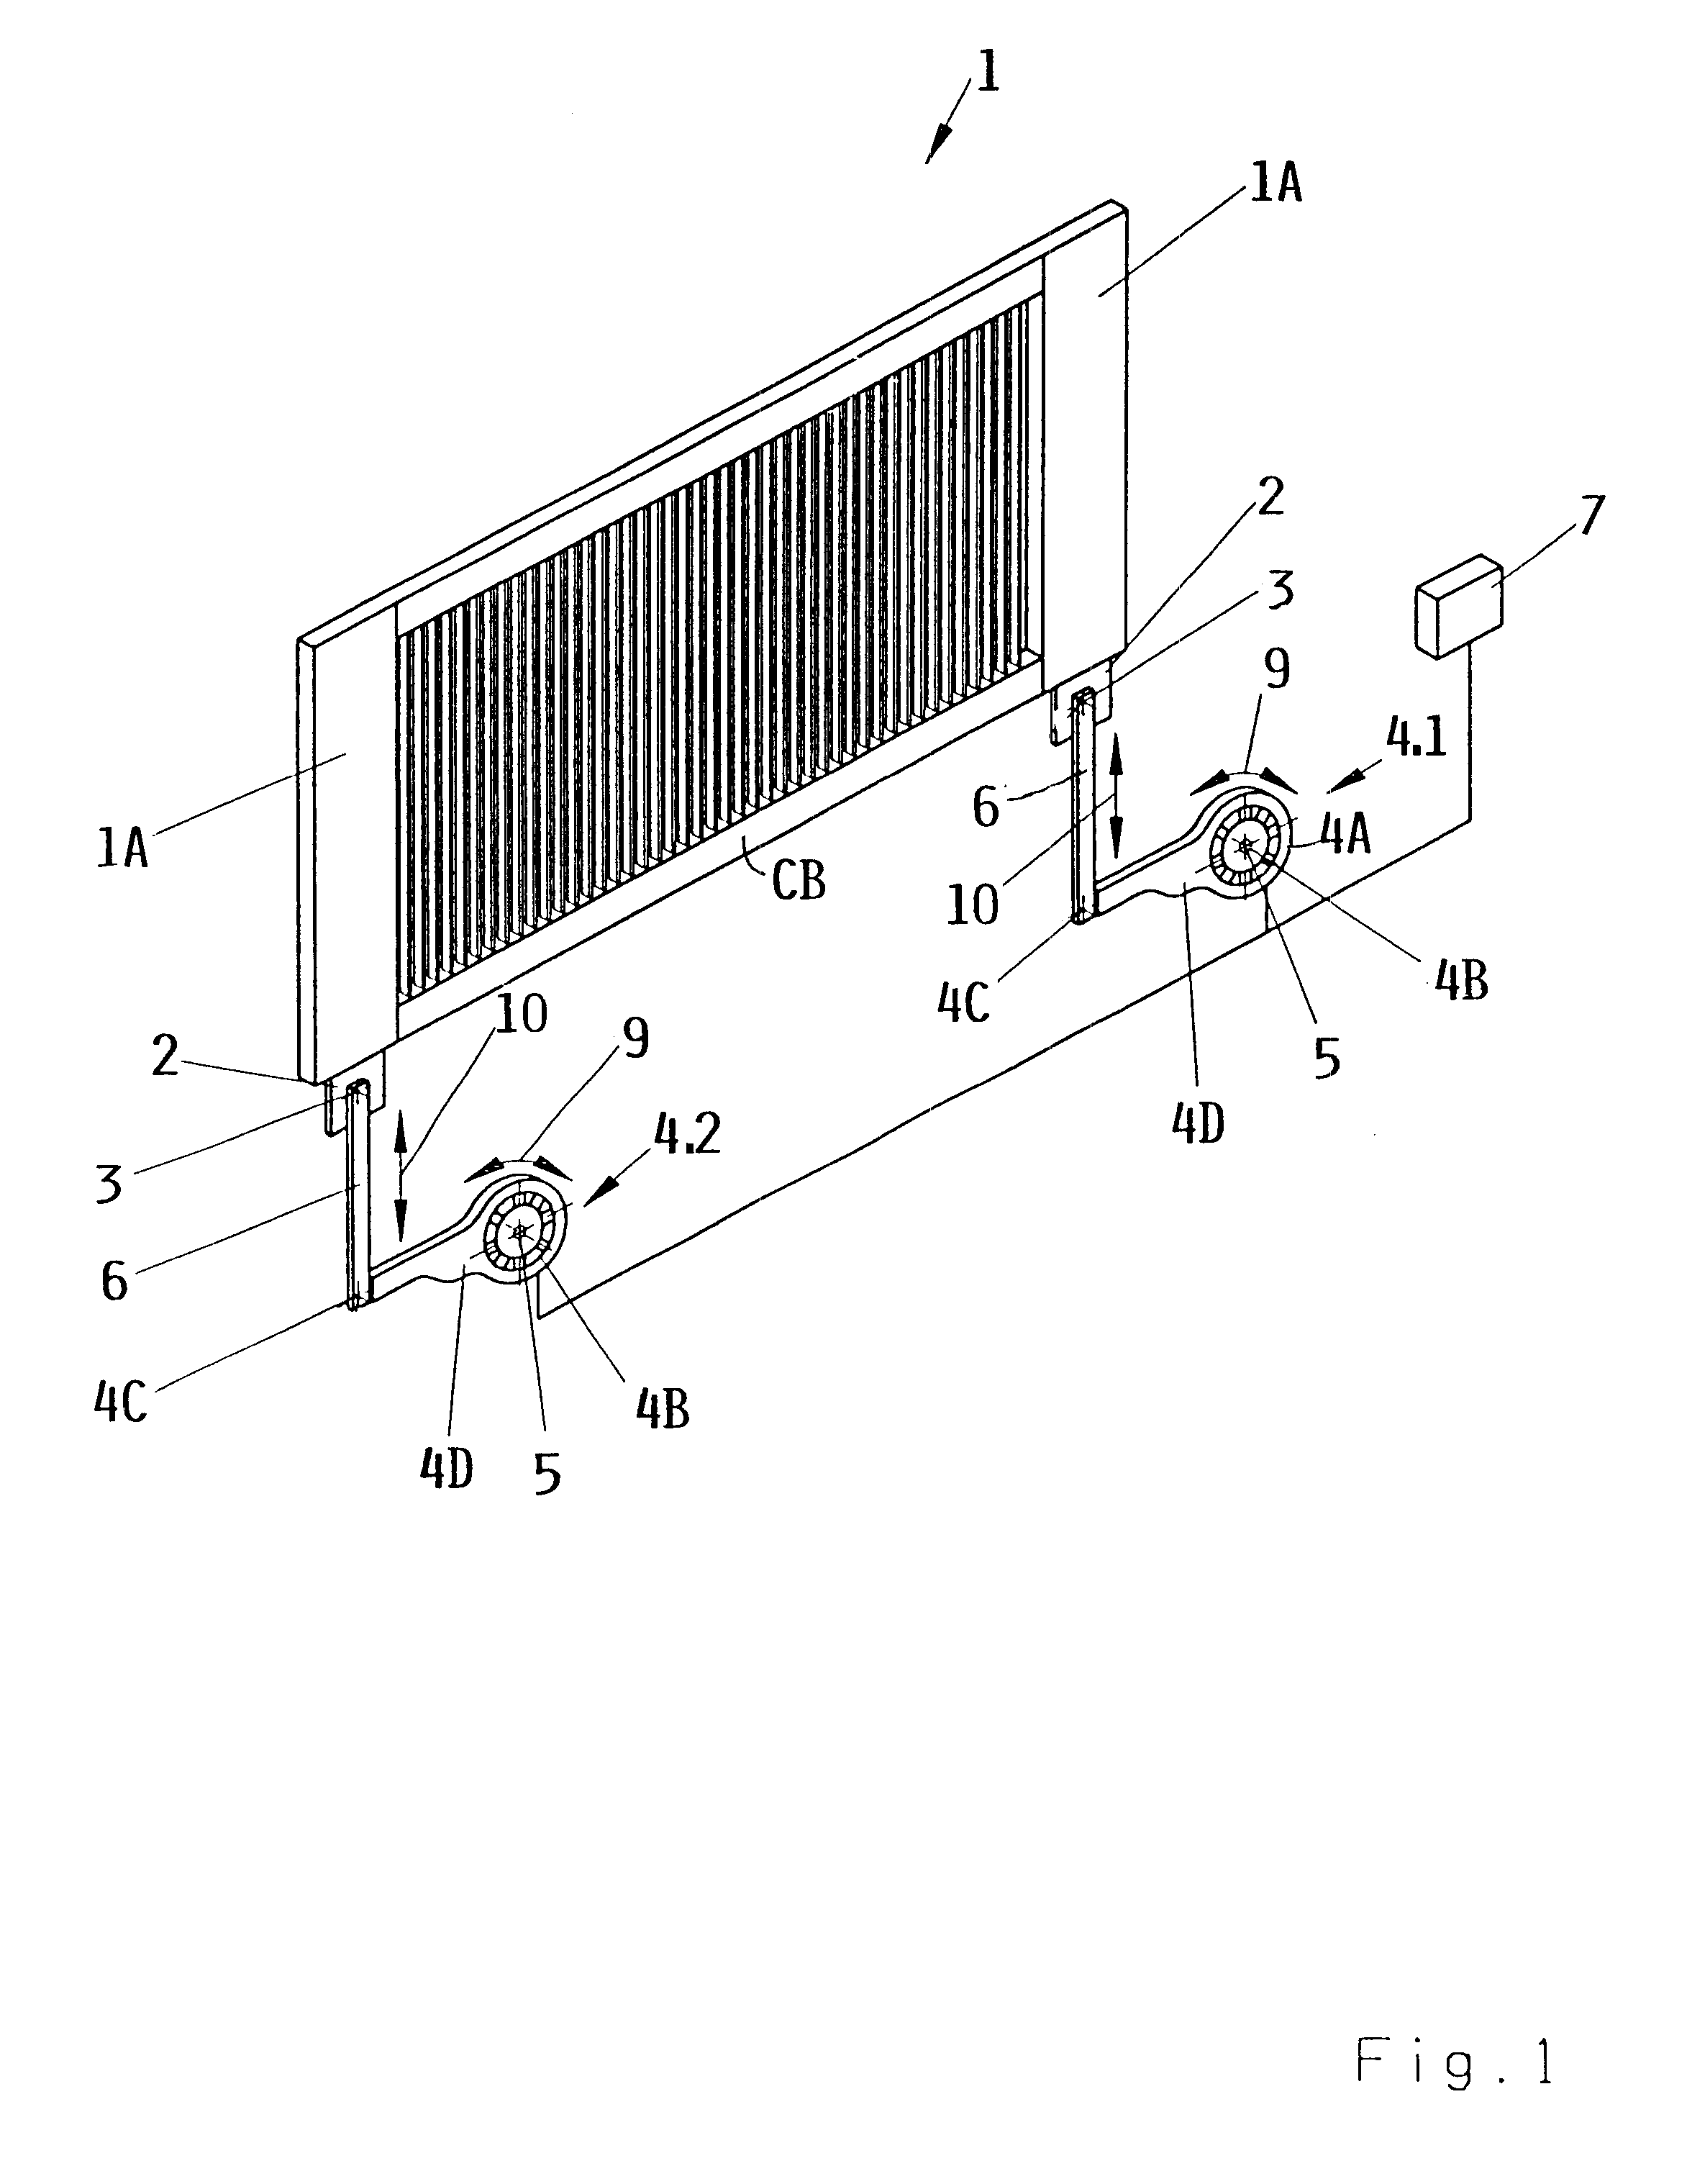 Electric motor drive mechanism for shed forming components of a loom